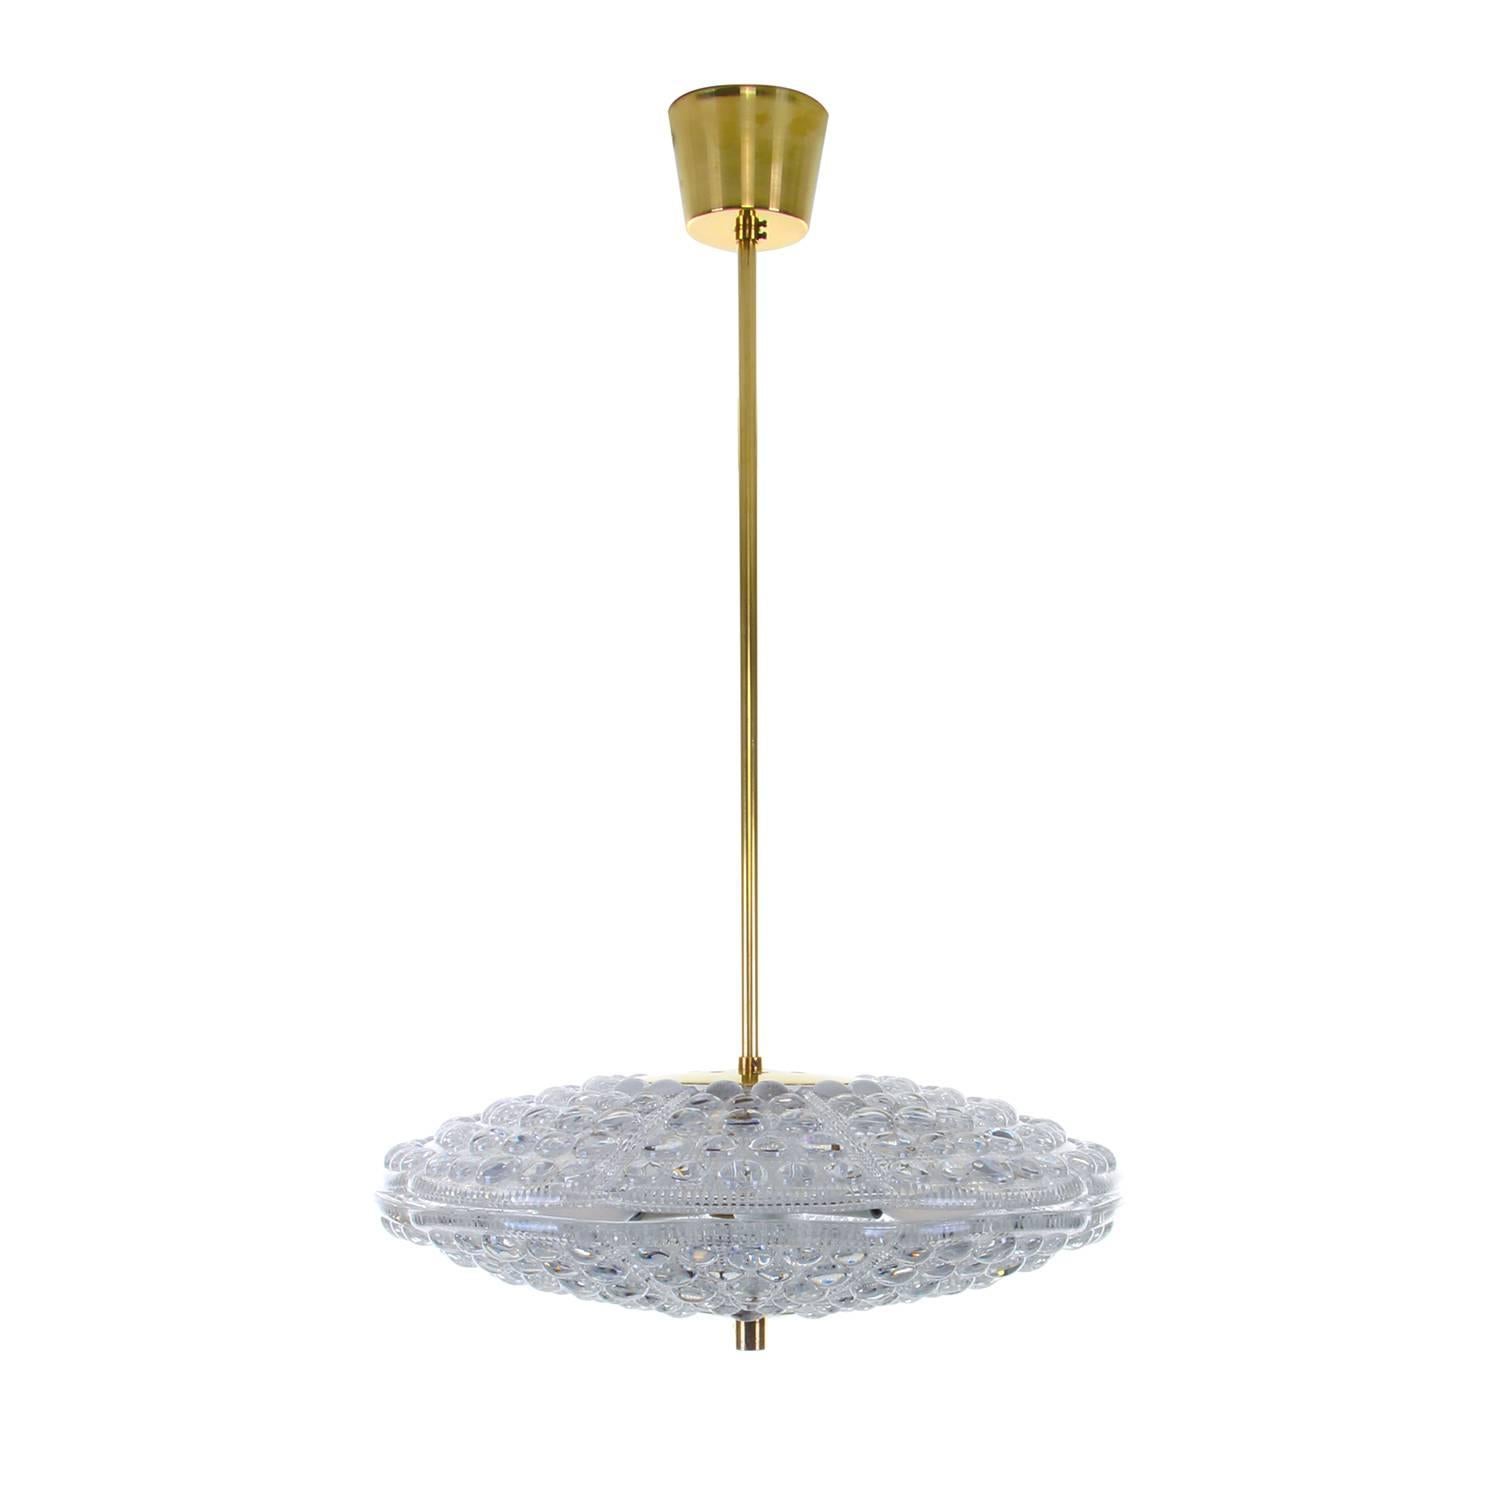 Orrefors Merkur, crystal ceiling lighting by Lyfa / Orrefors in the 1960s, beautiful Scandinavian Mid-Century Modern crystal pendant light in excellent vintage condition.

This large crystal lamp is comprised of two thick double corrugated crystal